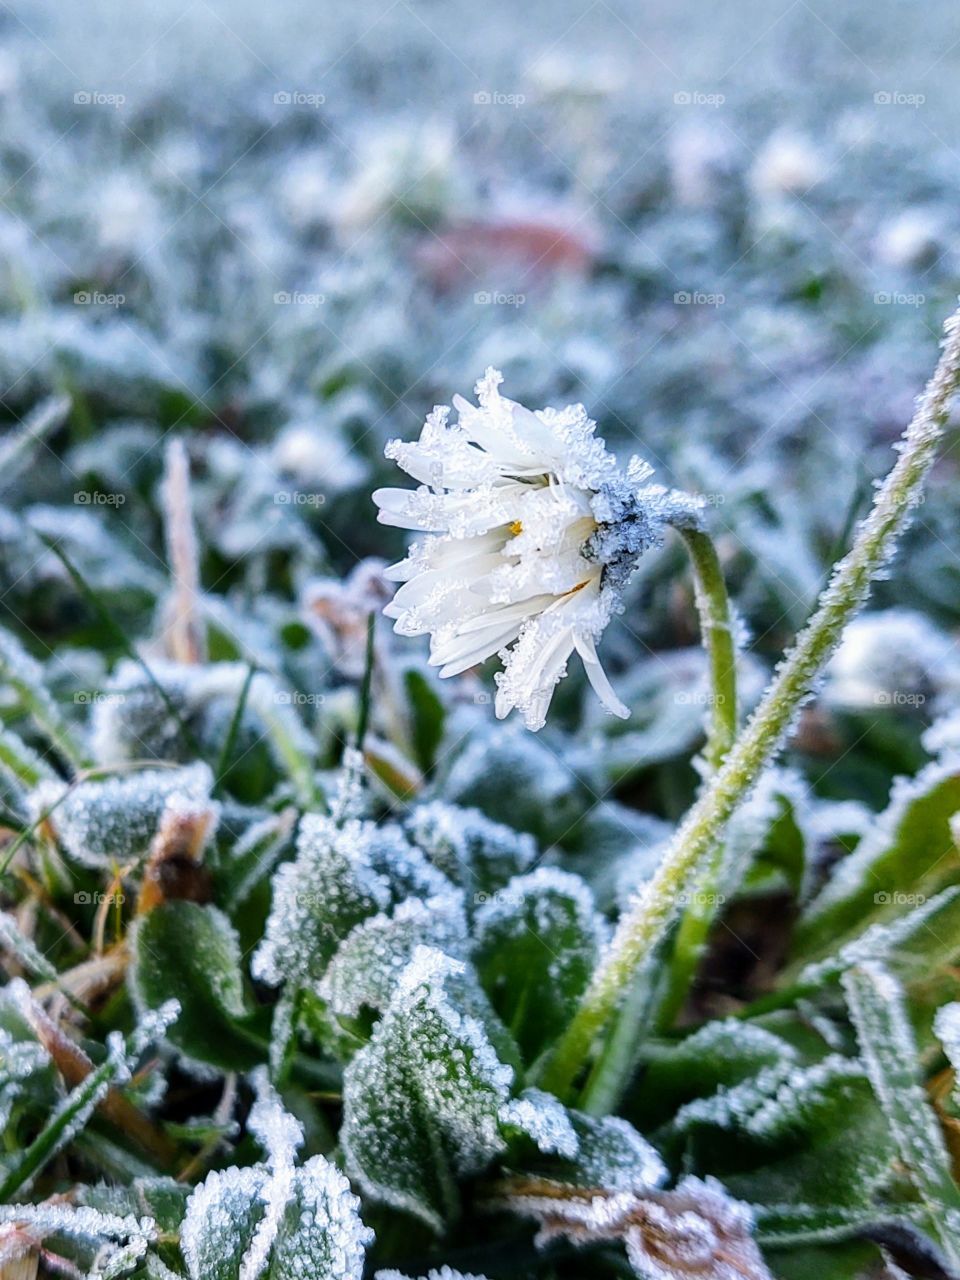 Daisy flower with a frost during winter